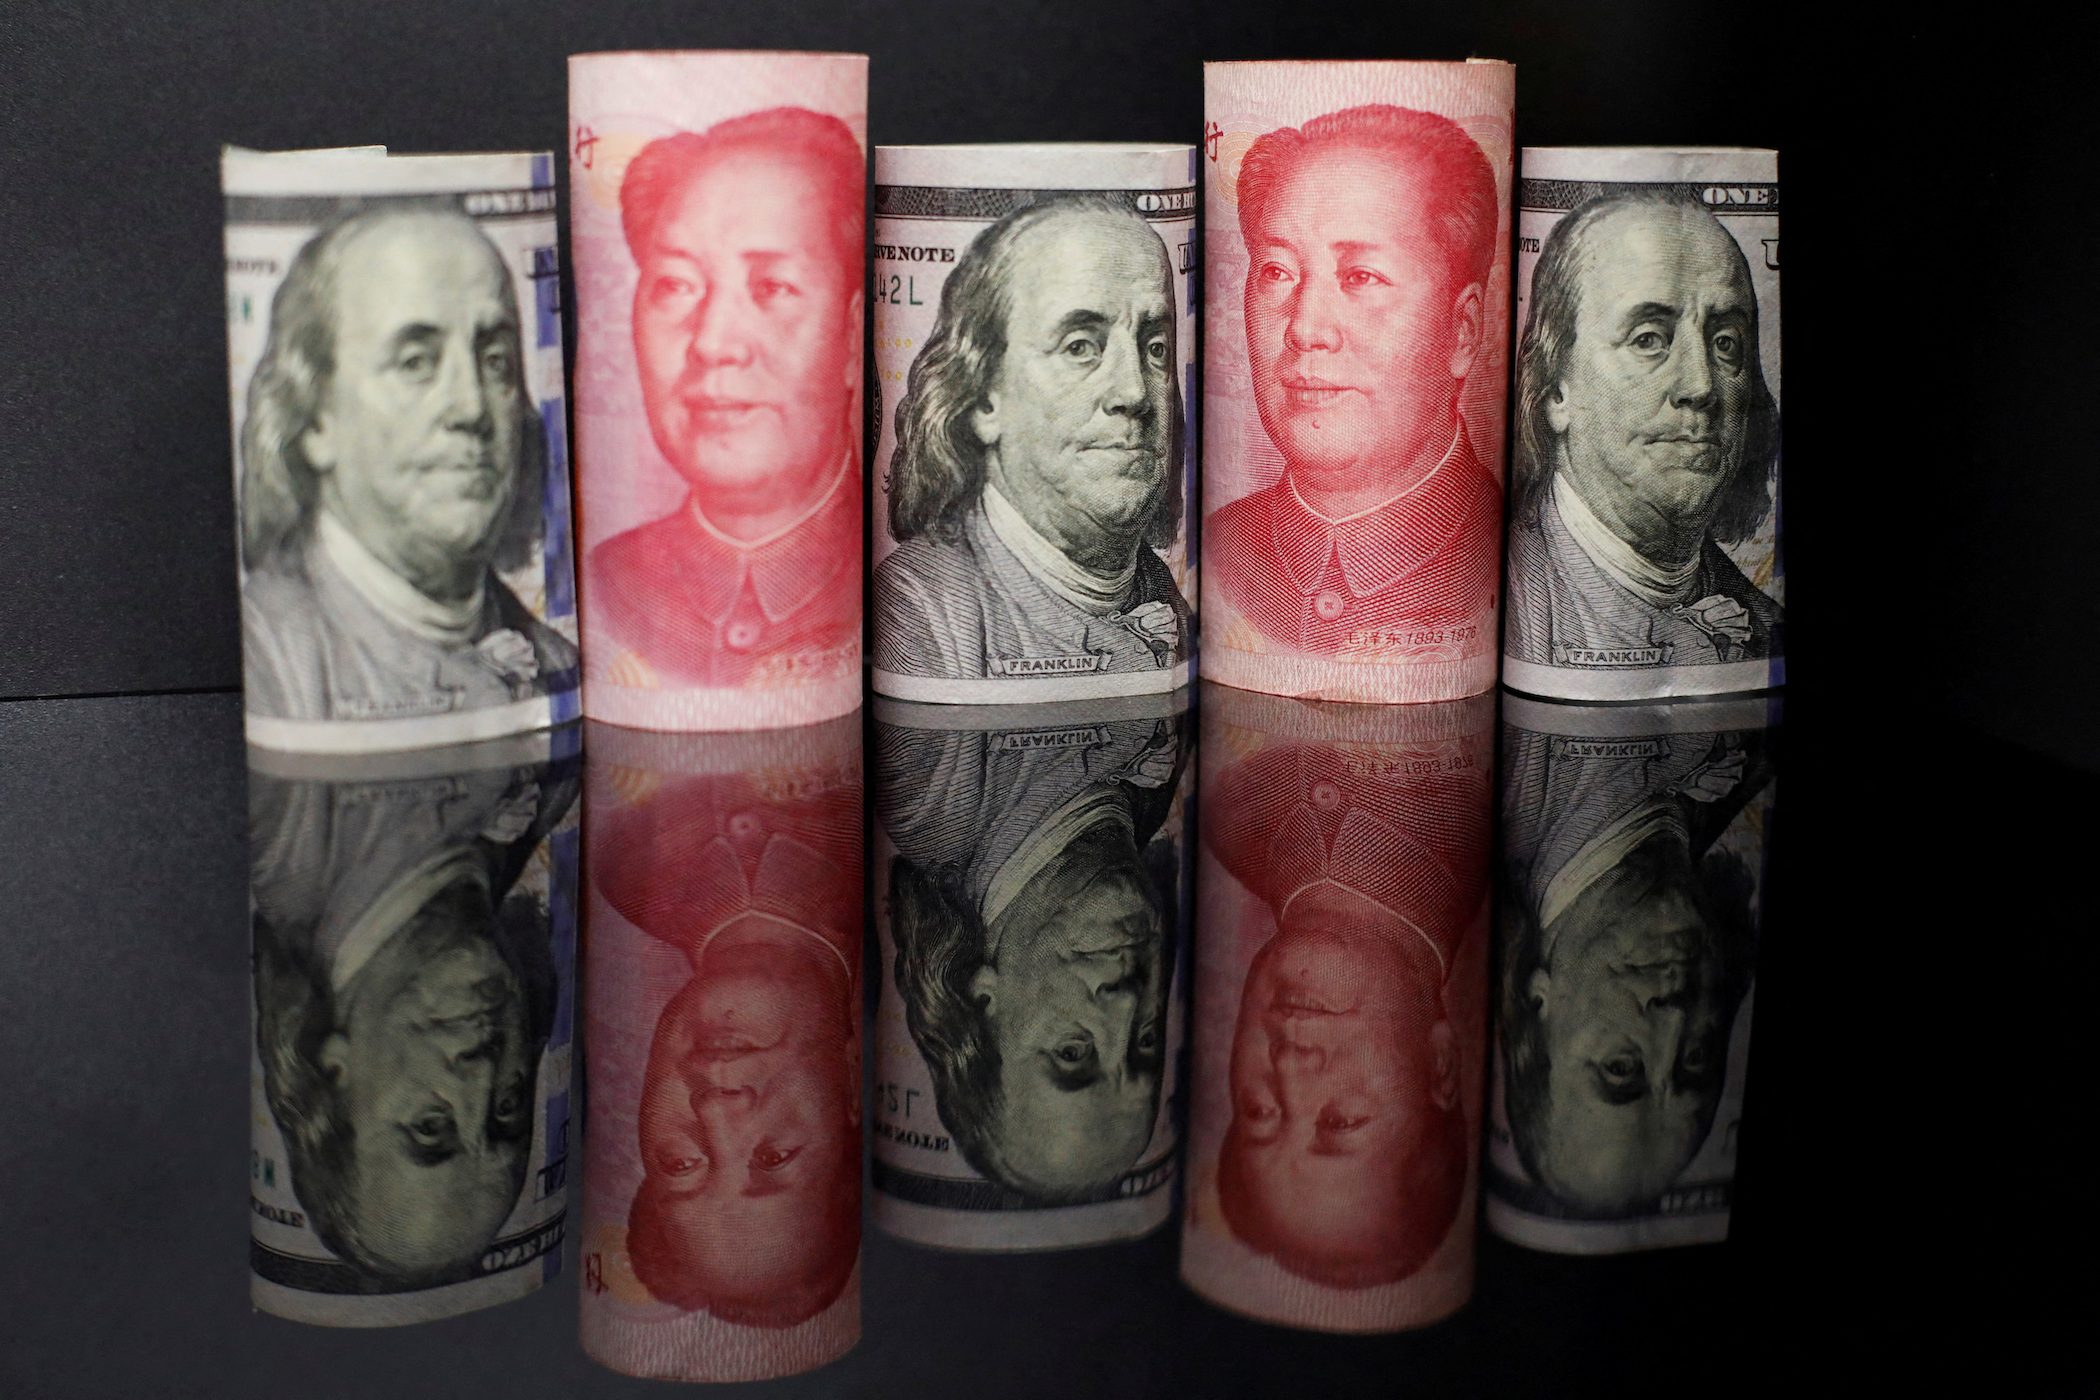 Chinese companies hang onto dollars, hedge to prepare for volatile yuan